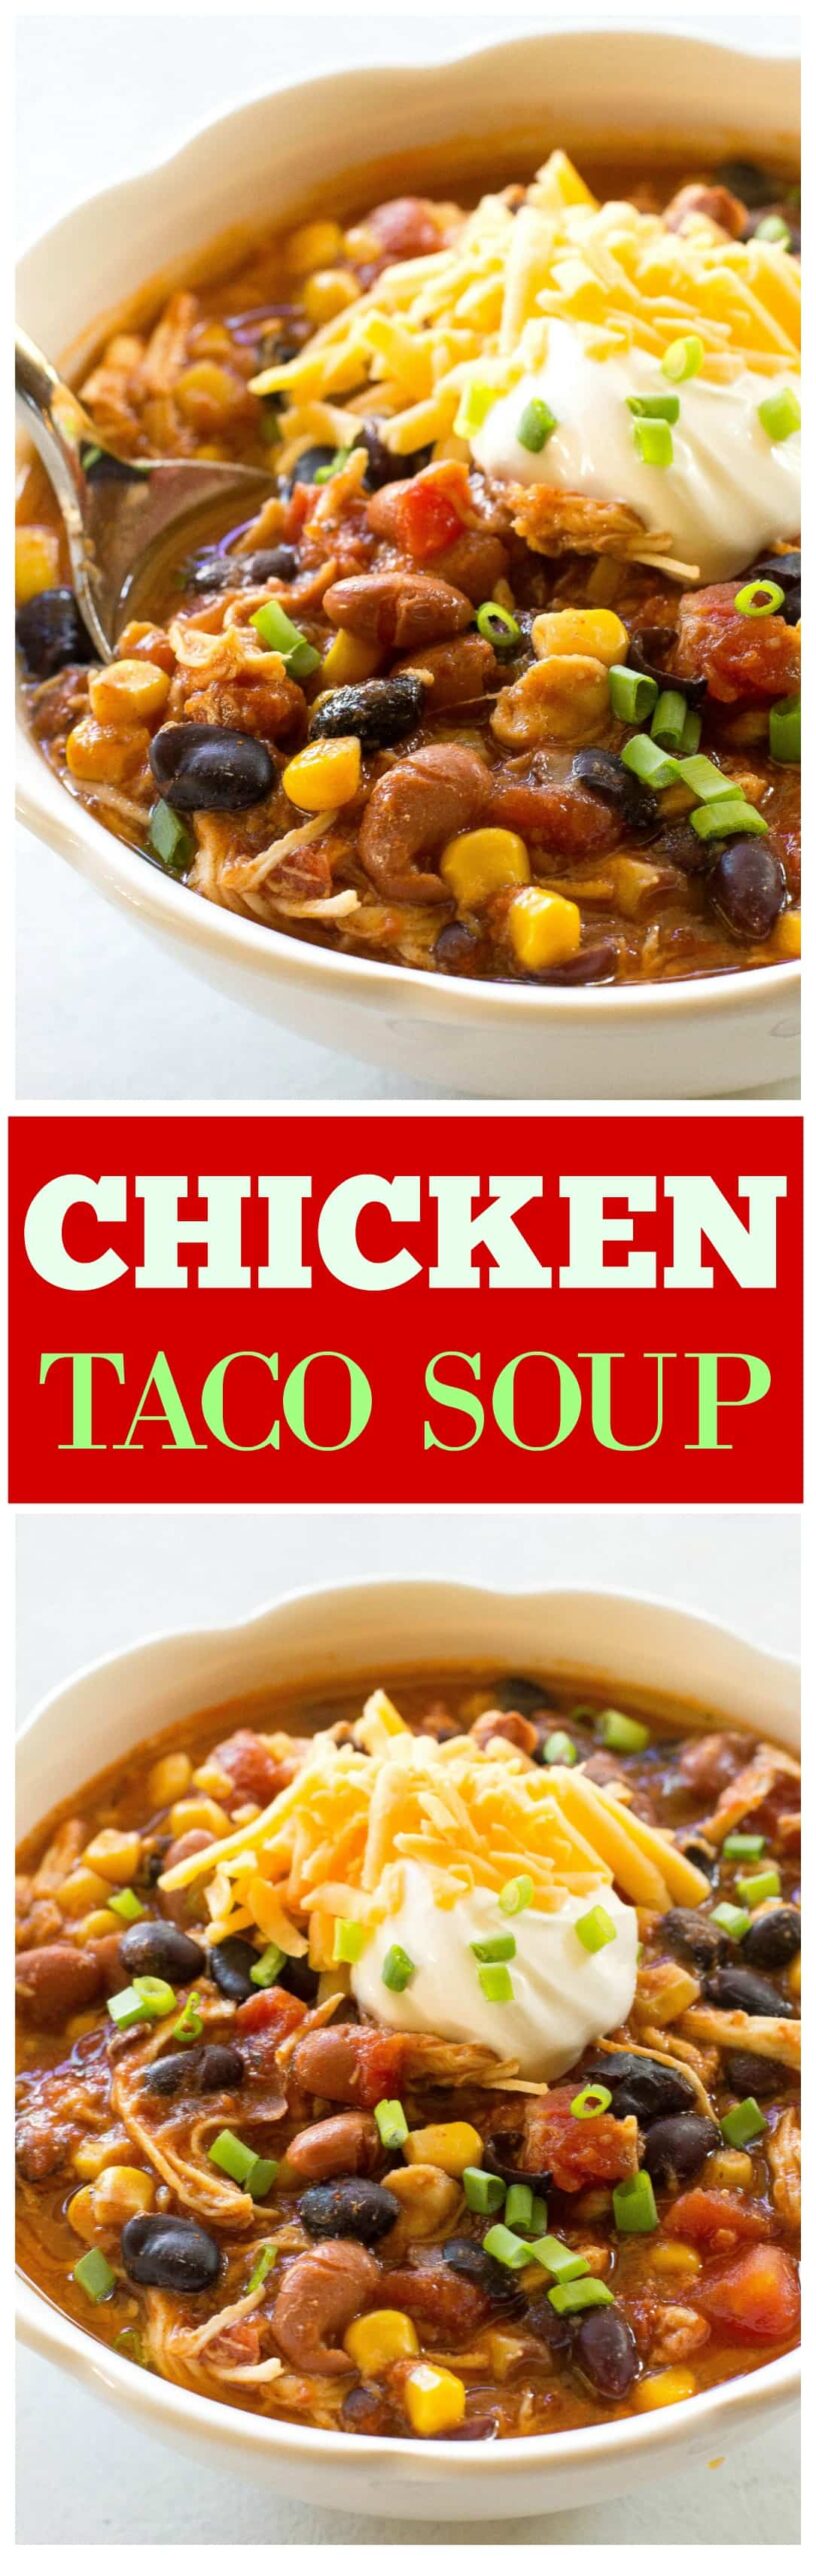 chicken taco soup scaled - Chicken Taco Soup